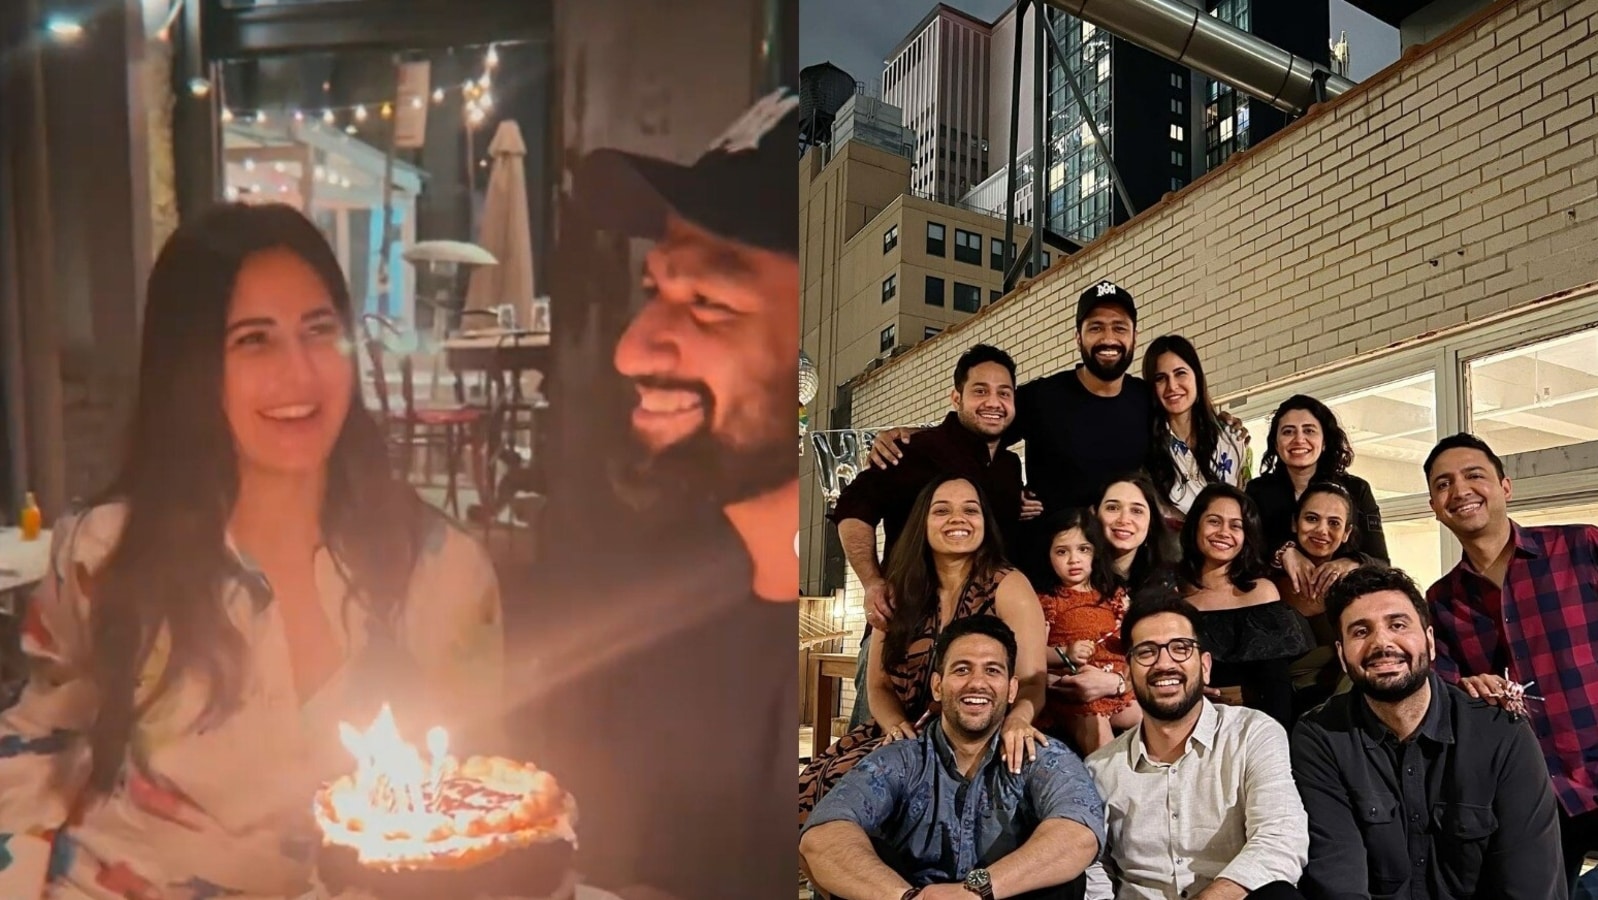 Katrina Kaif sings ‘Happy Birthday’ for Vicky Kaushal at rooftop party in NYC